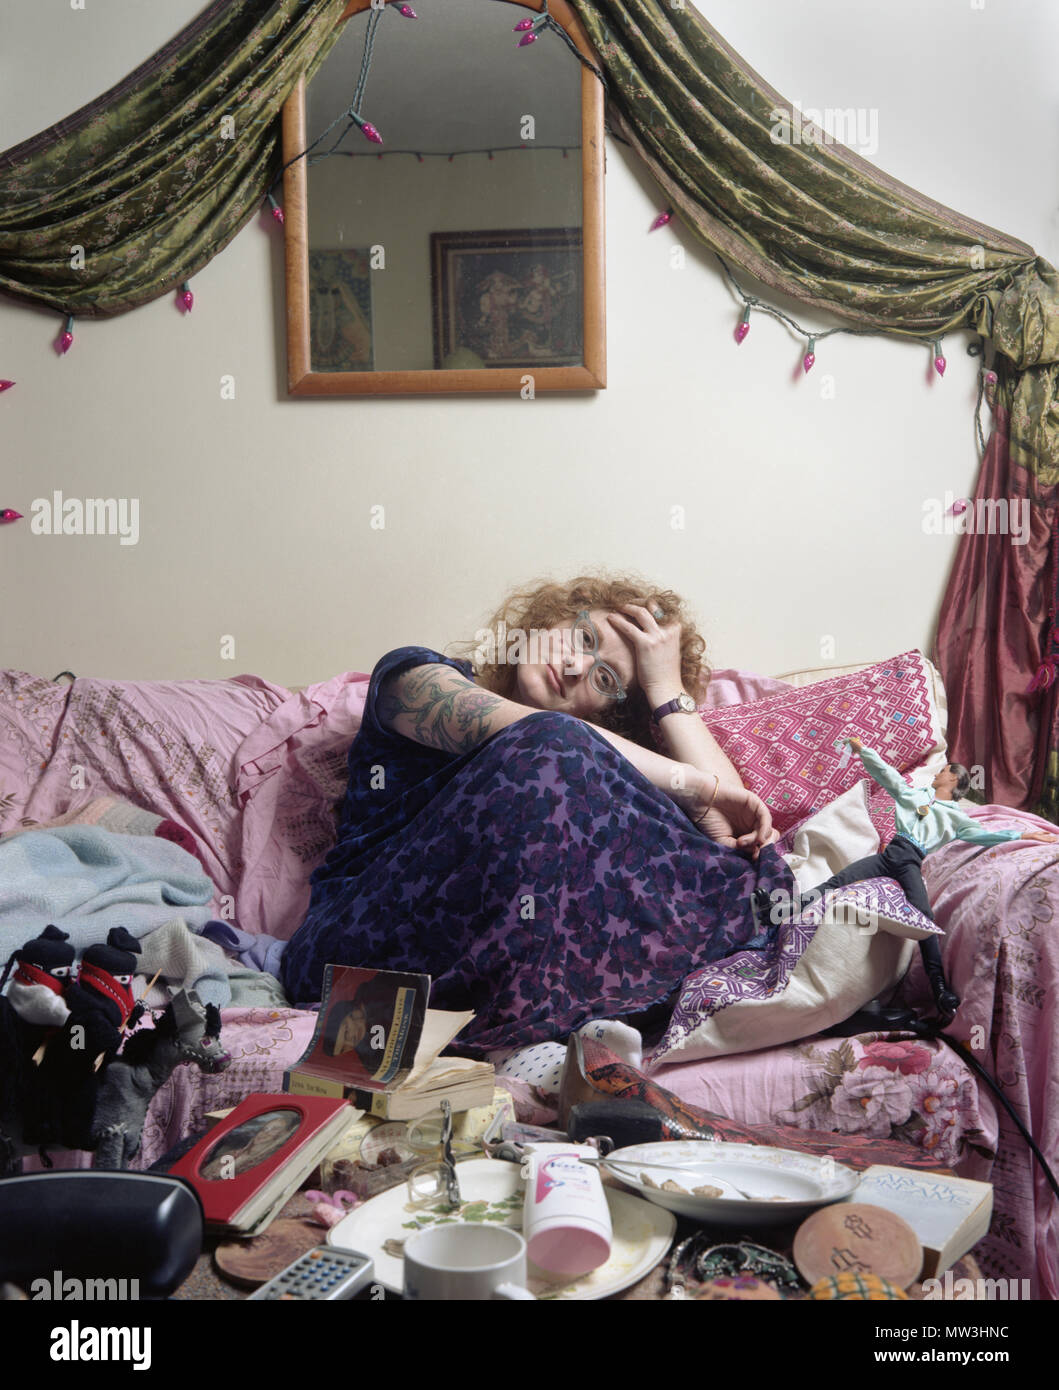 Tattooed woman in purple nightgown sitting in a cluttered living room gazing peacefully into the camera. Stock Photo